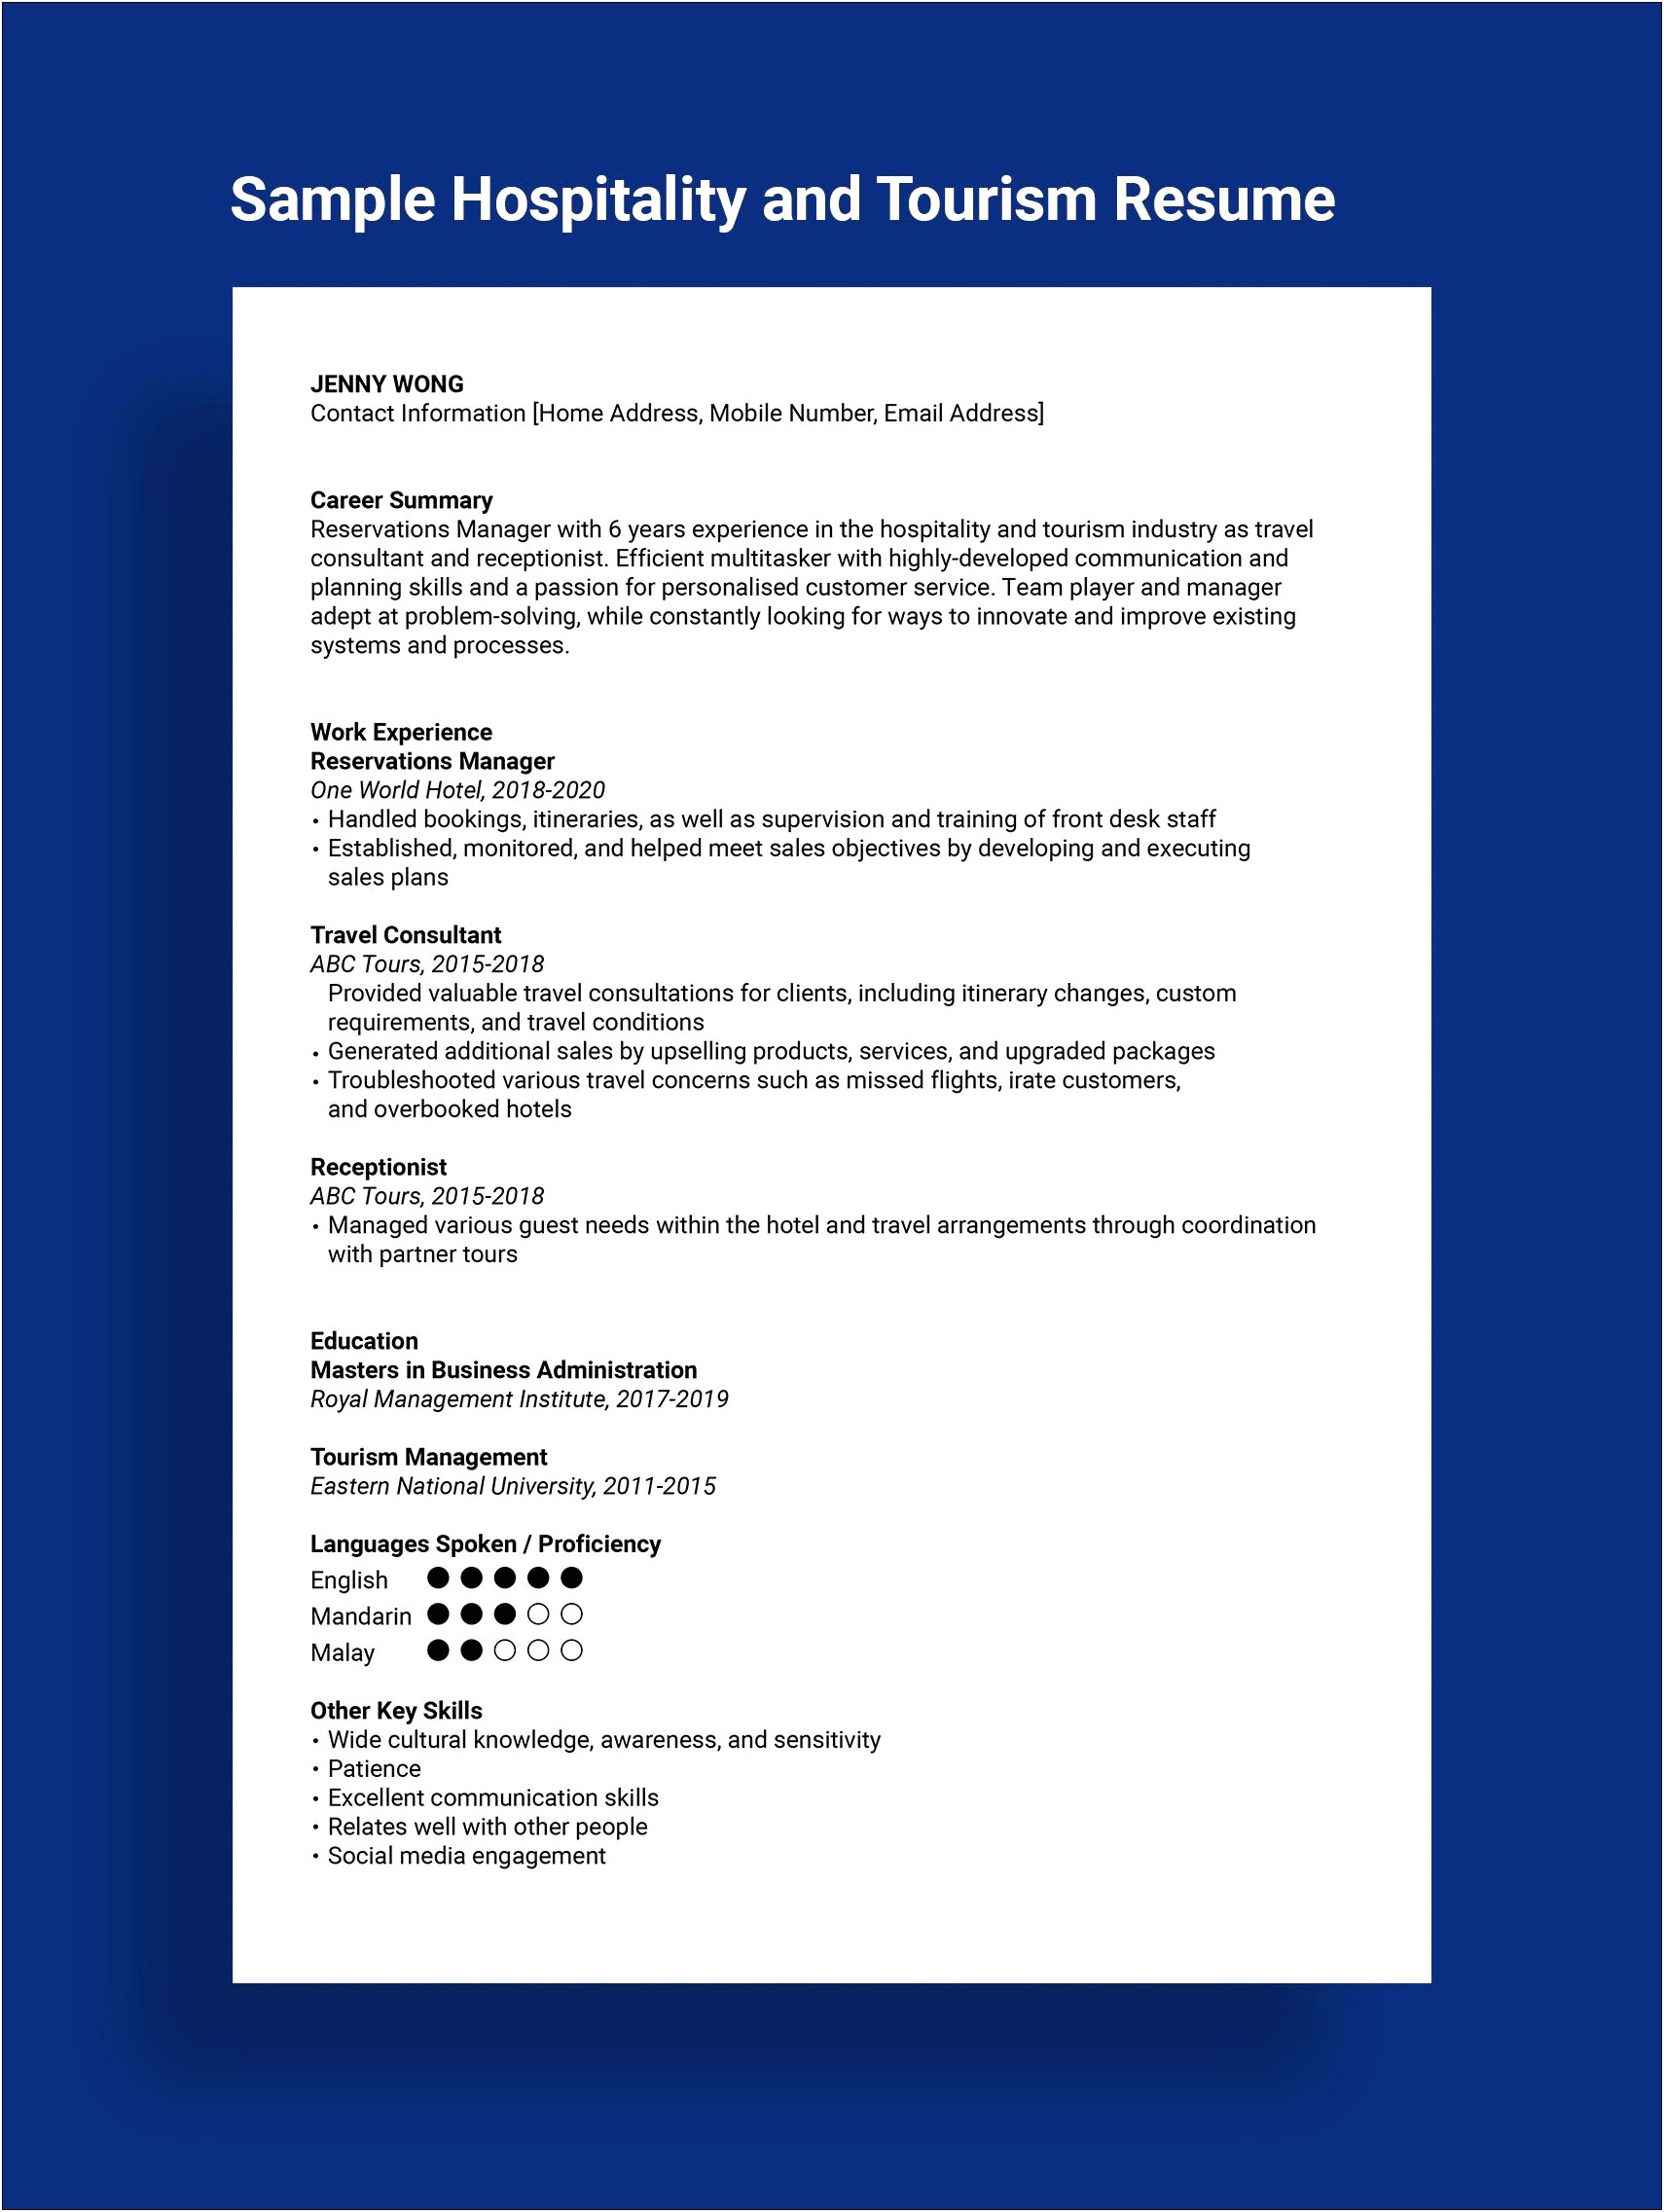 Resume Samples For Travel And Tourism